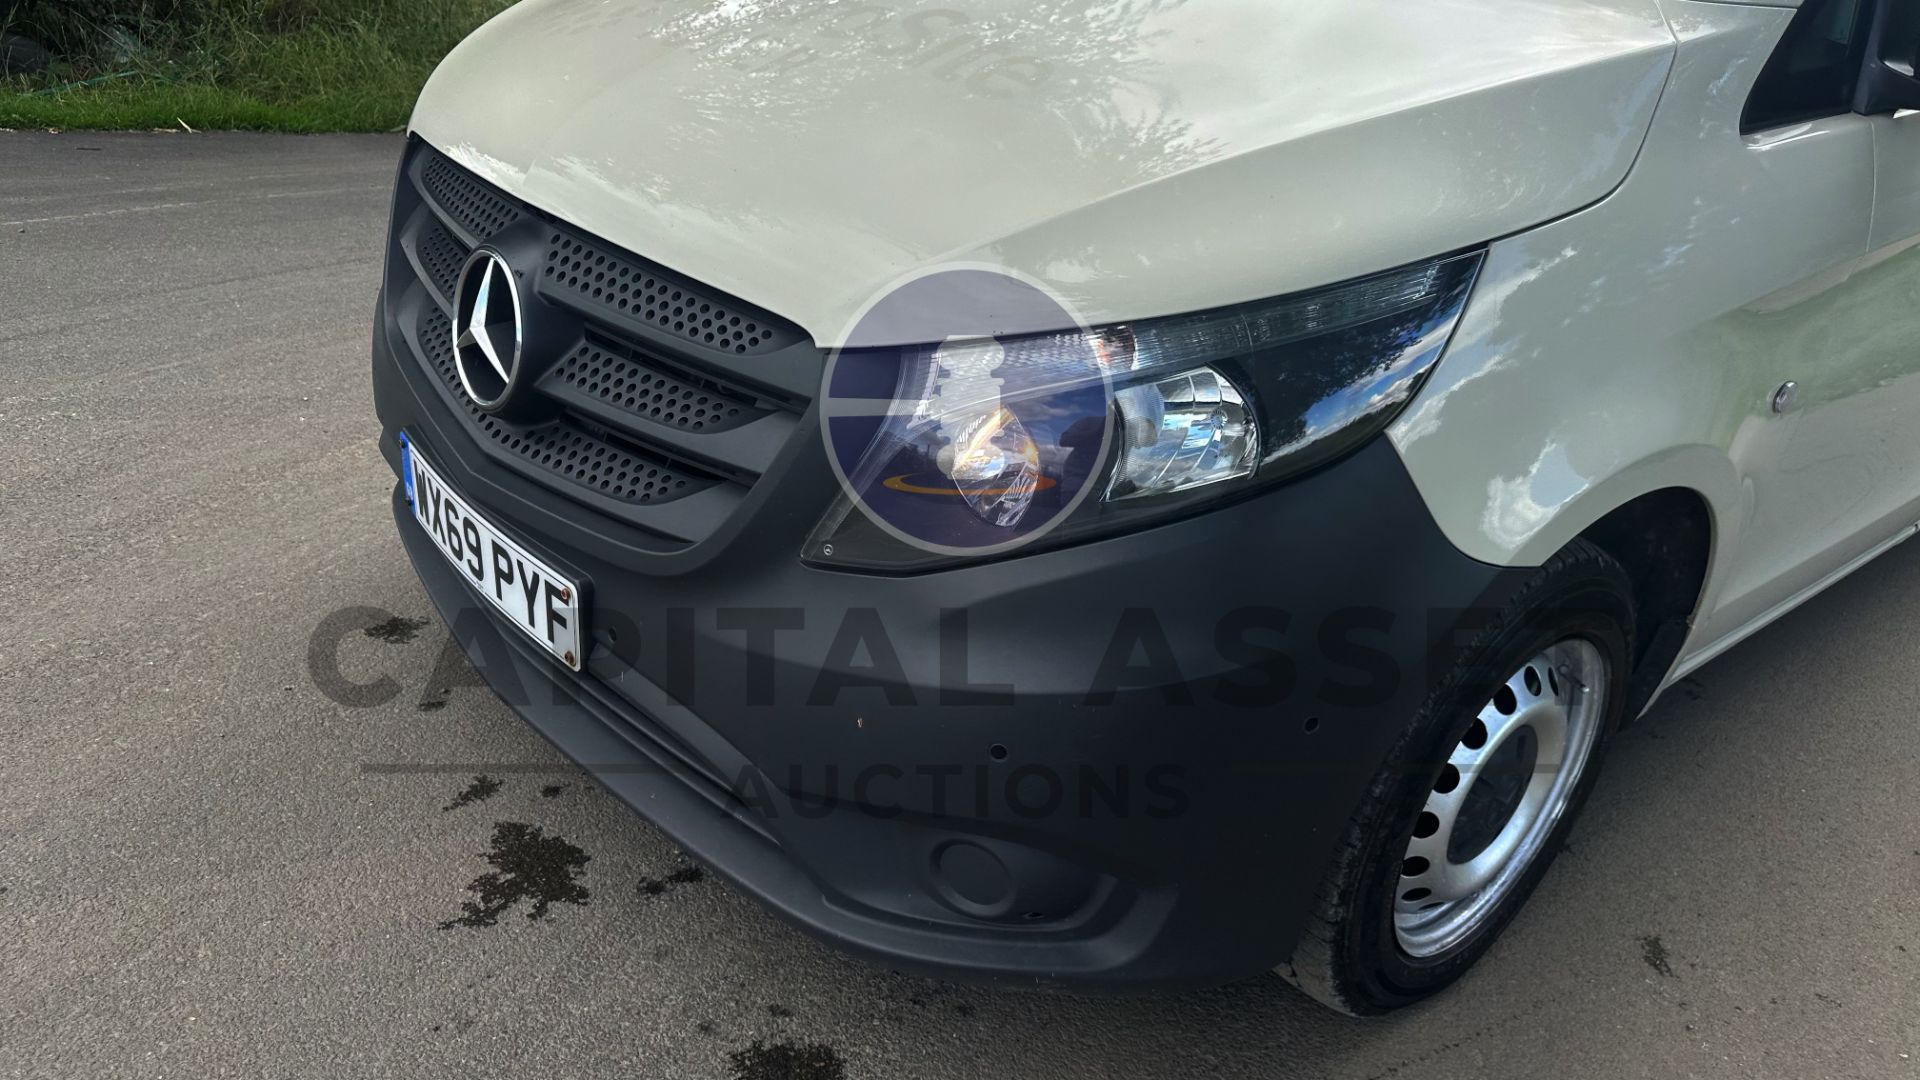 (ON SALE) MERCEDES-BENZ VITO 114 CDI *LWB - PANEL VAN* (2020) 7-G TRONIC AUTOMATIC (1 OWNER) *A/C* - Image 16 of 43